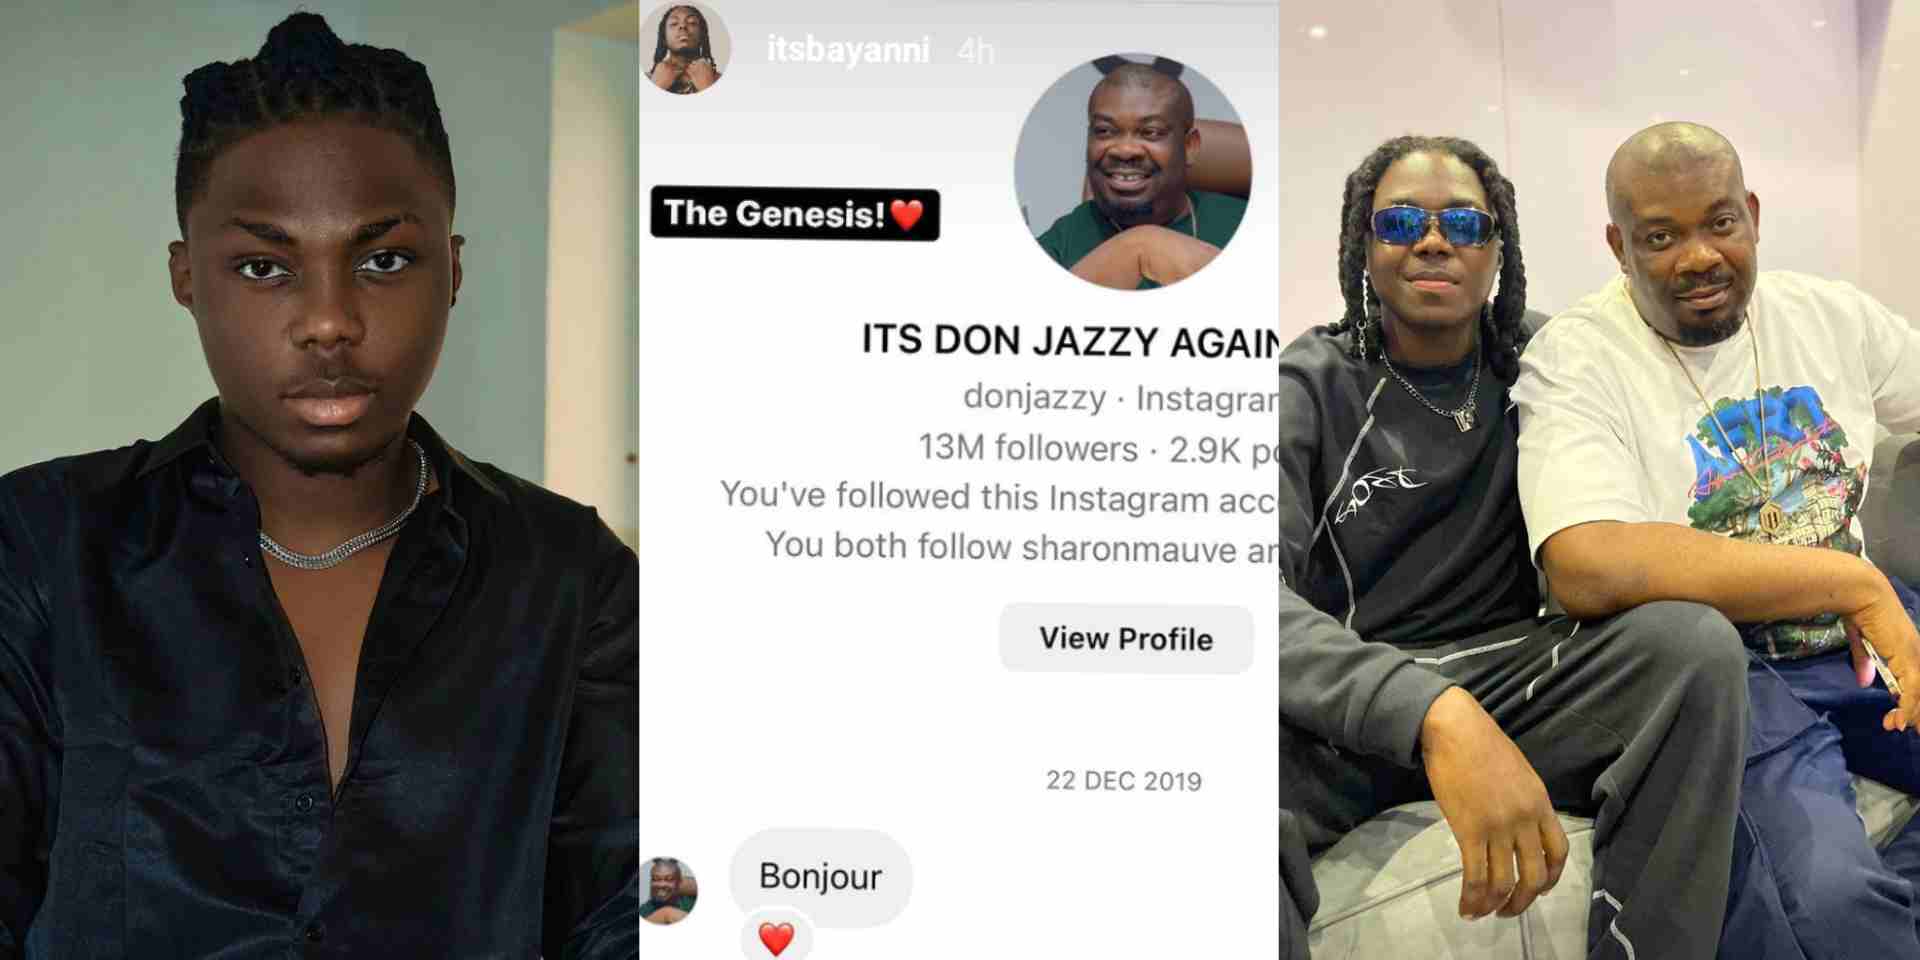 Don Jazzy's latest signee, Bayanni shares chat with producer